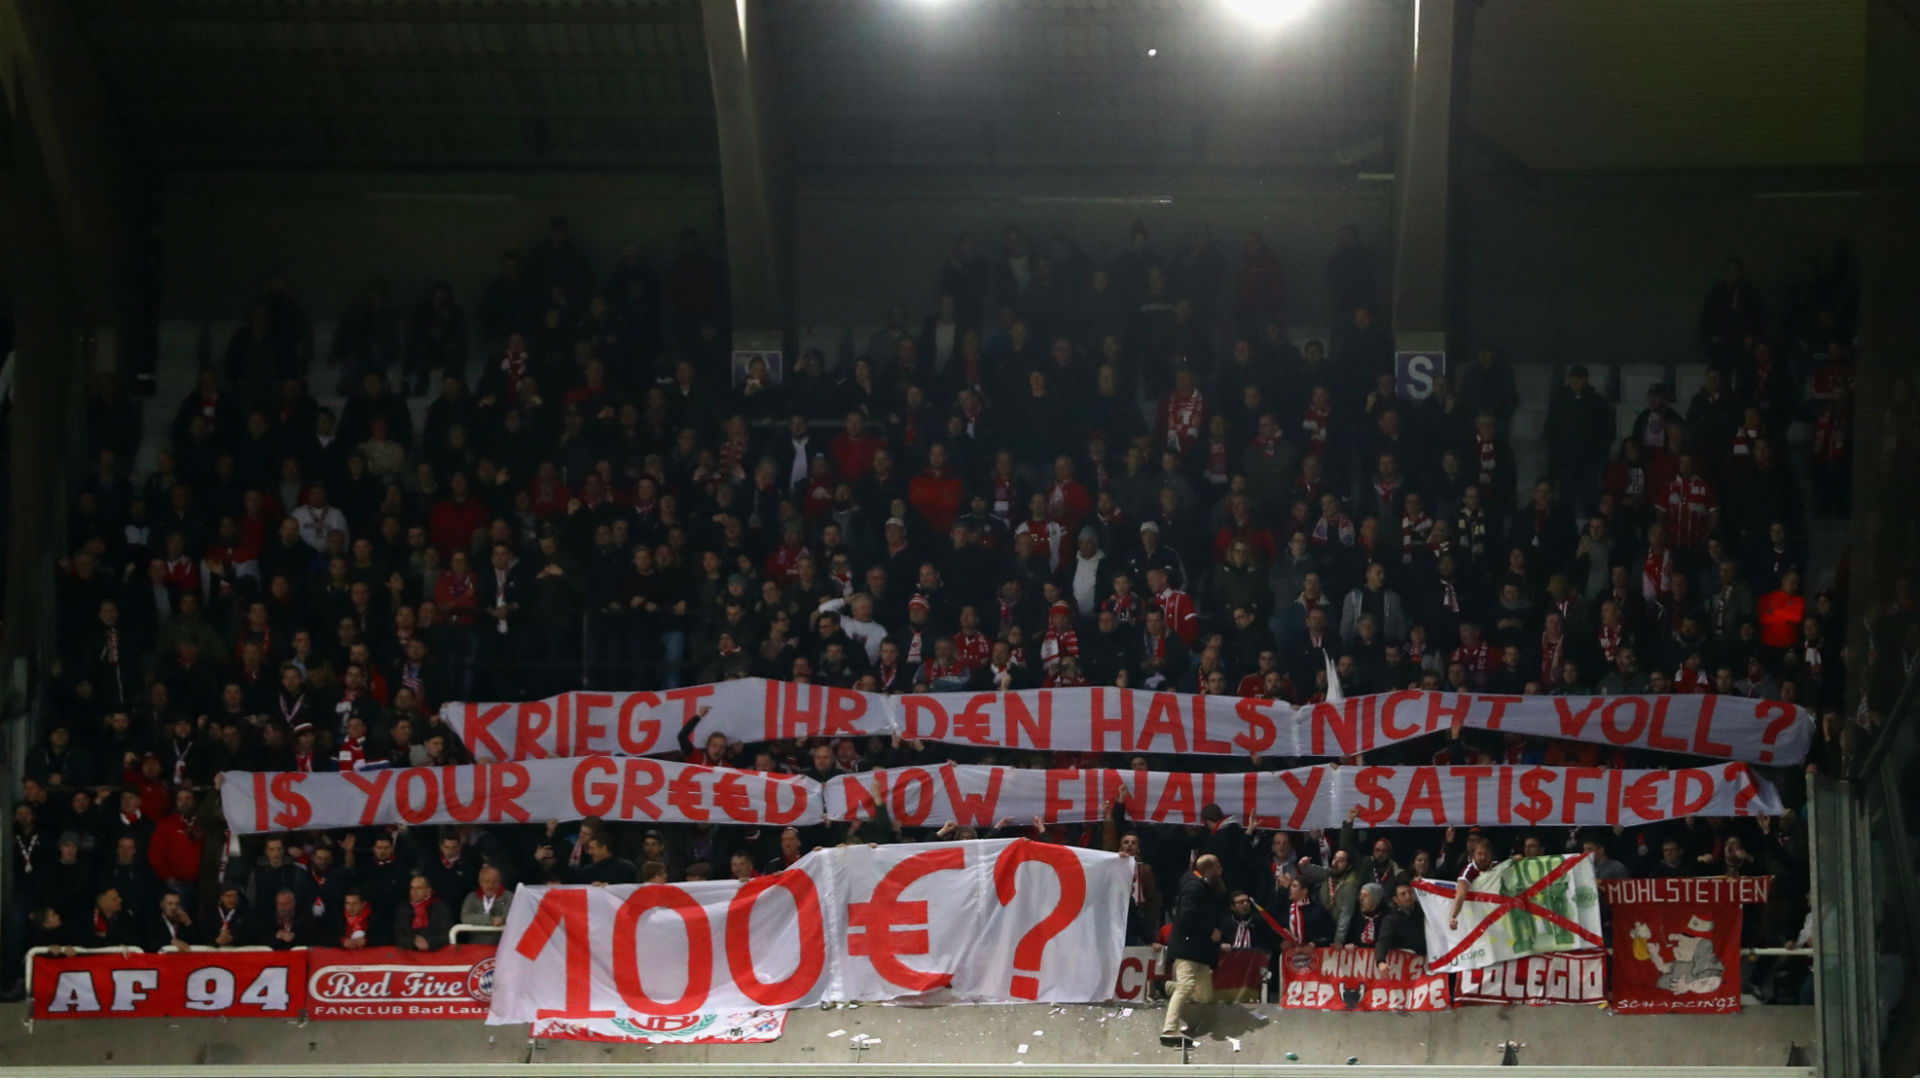 UEFA to investigate Bayern after fan protest